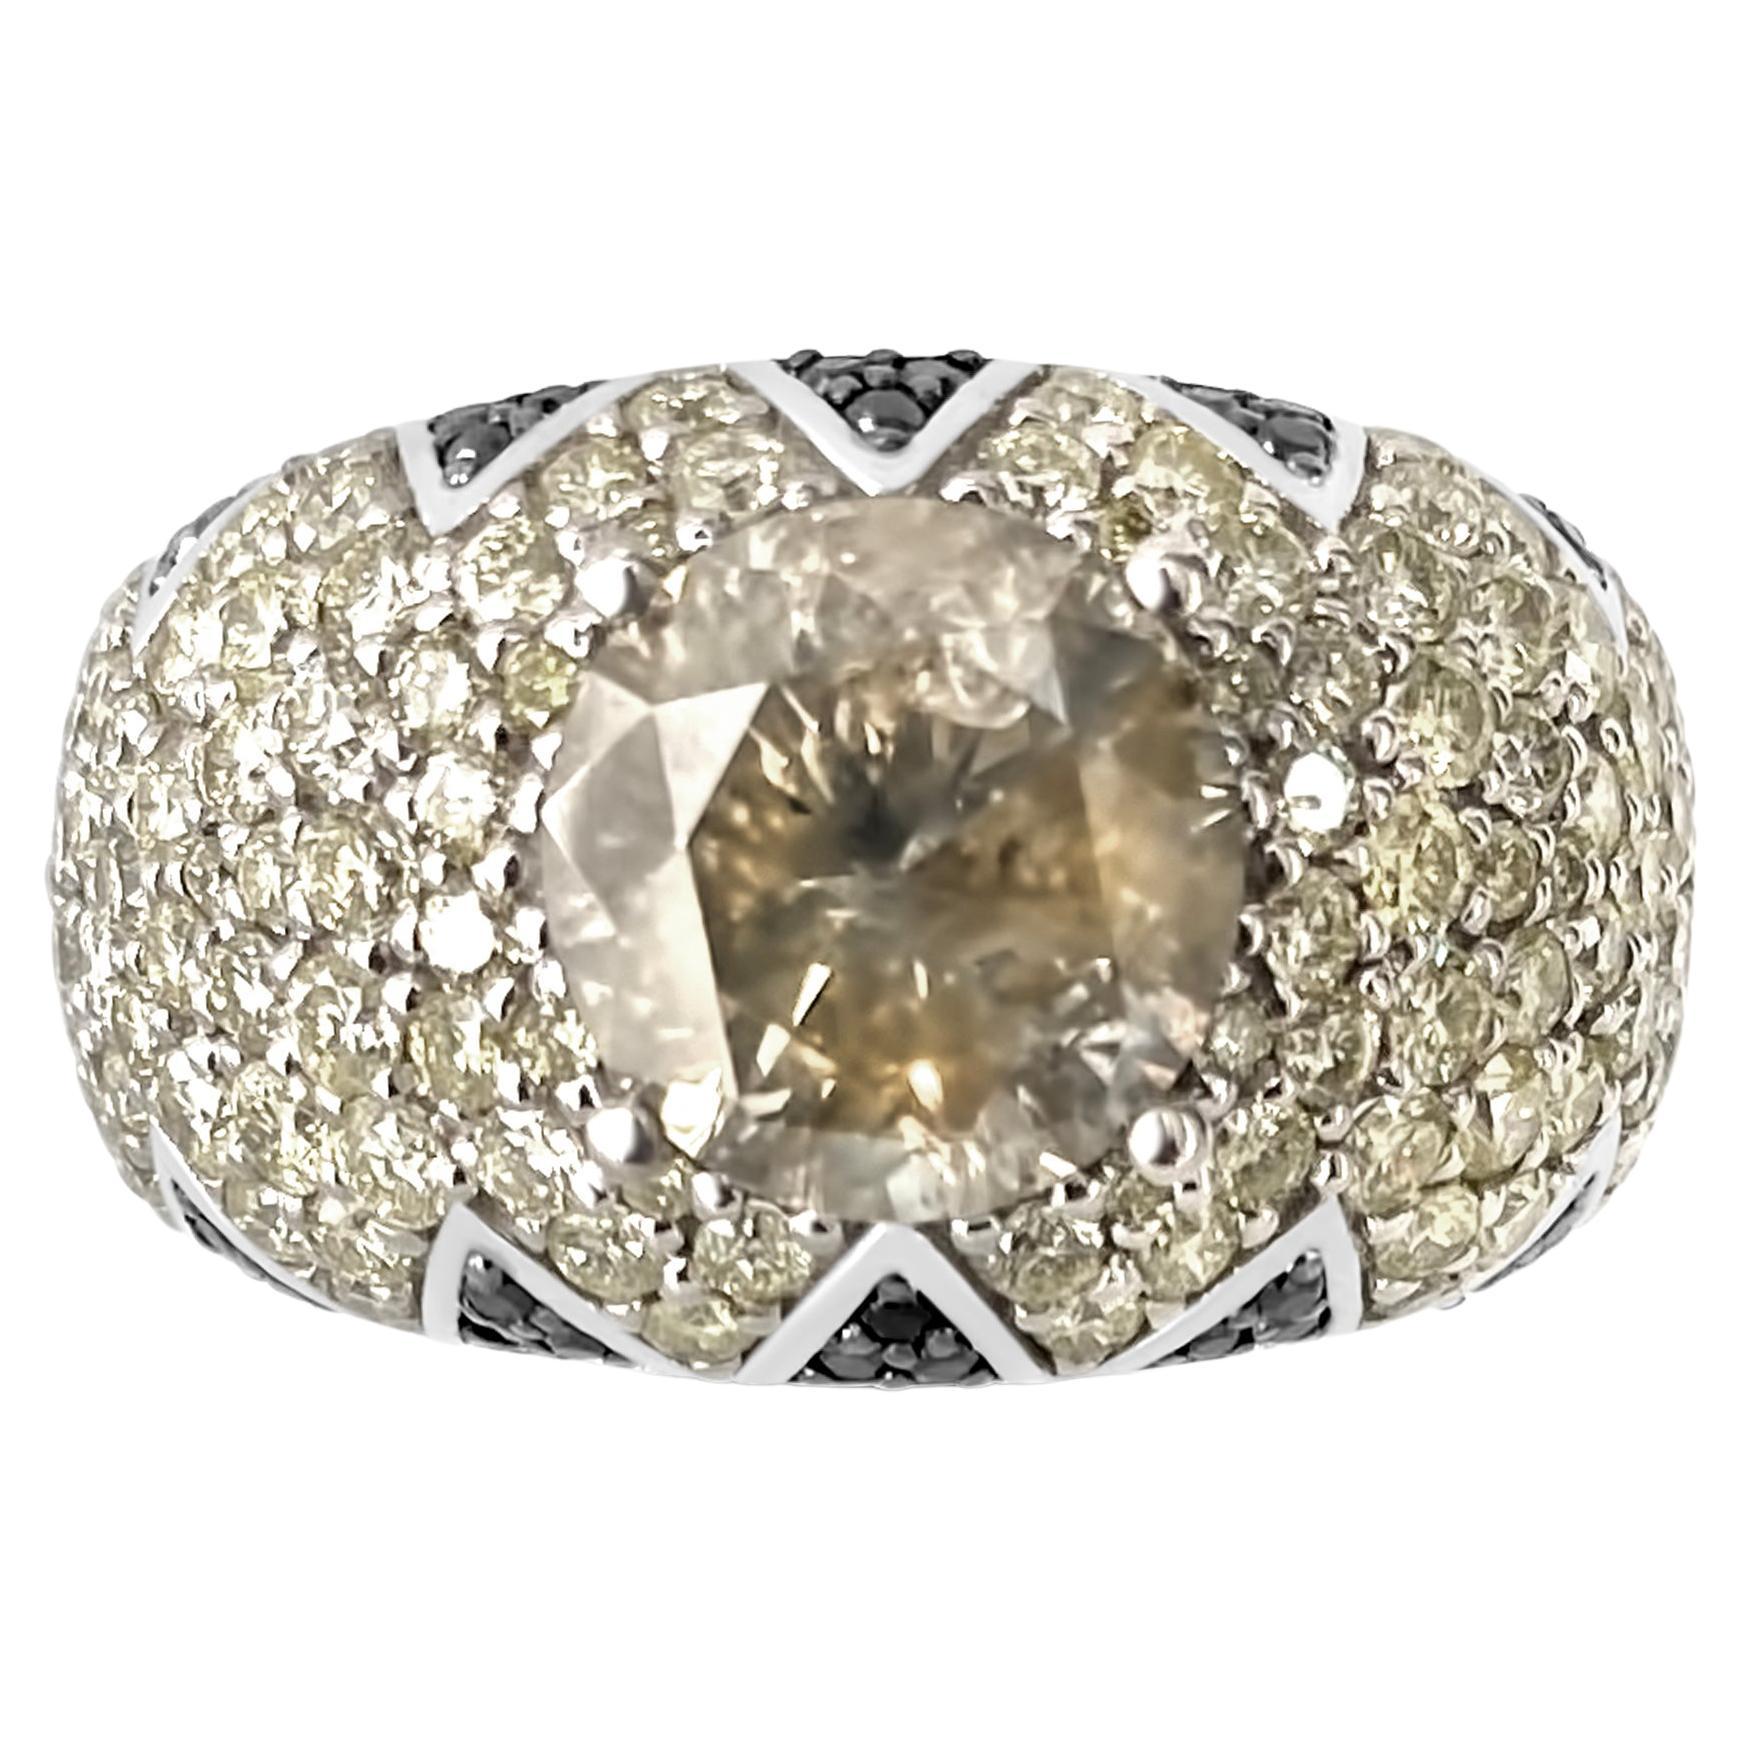 Lotus Bombe ring with 2.53 ct champagne diamond solitaire & black diamond petals For Sale